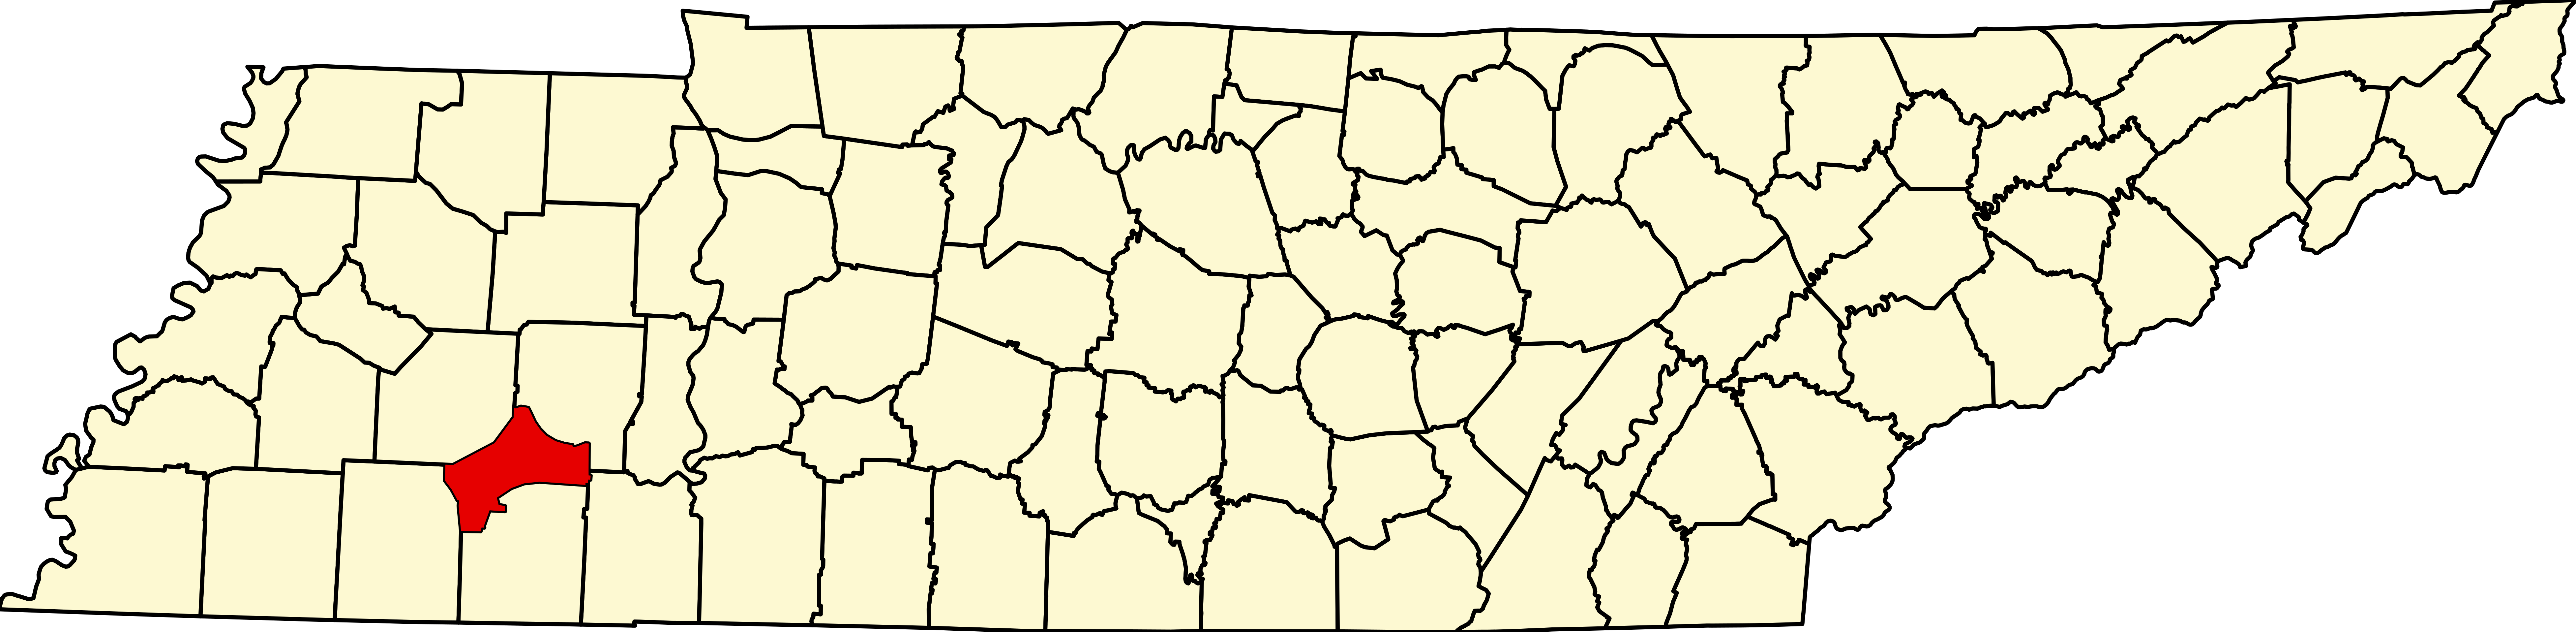 upload.wikimedia.org/wikipedia/commons/thumb/2/2a/Map_of_Tennessee_highlighting_Chester_County.svg/7814px-Map_of_Tennessee_highlighting_Chester_County.svg.png